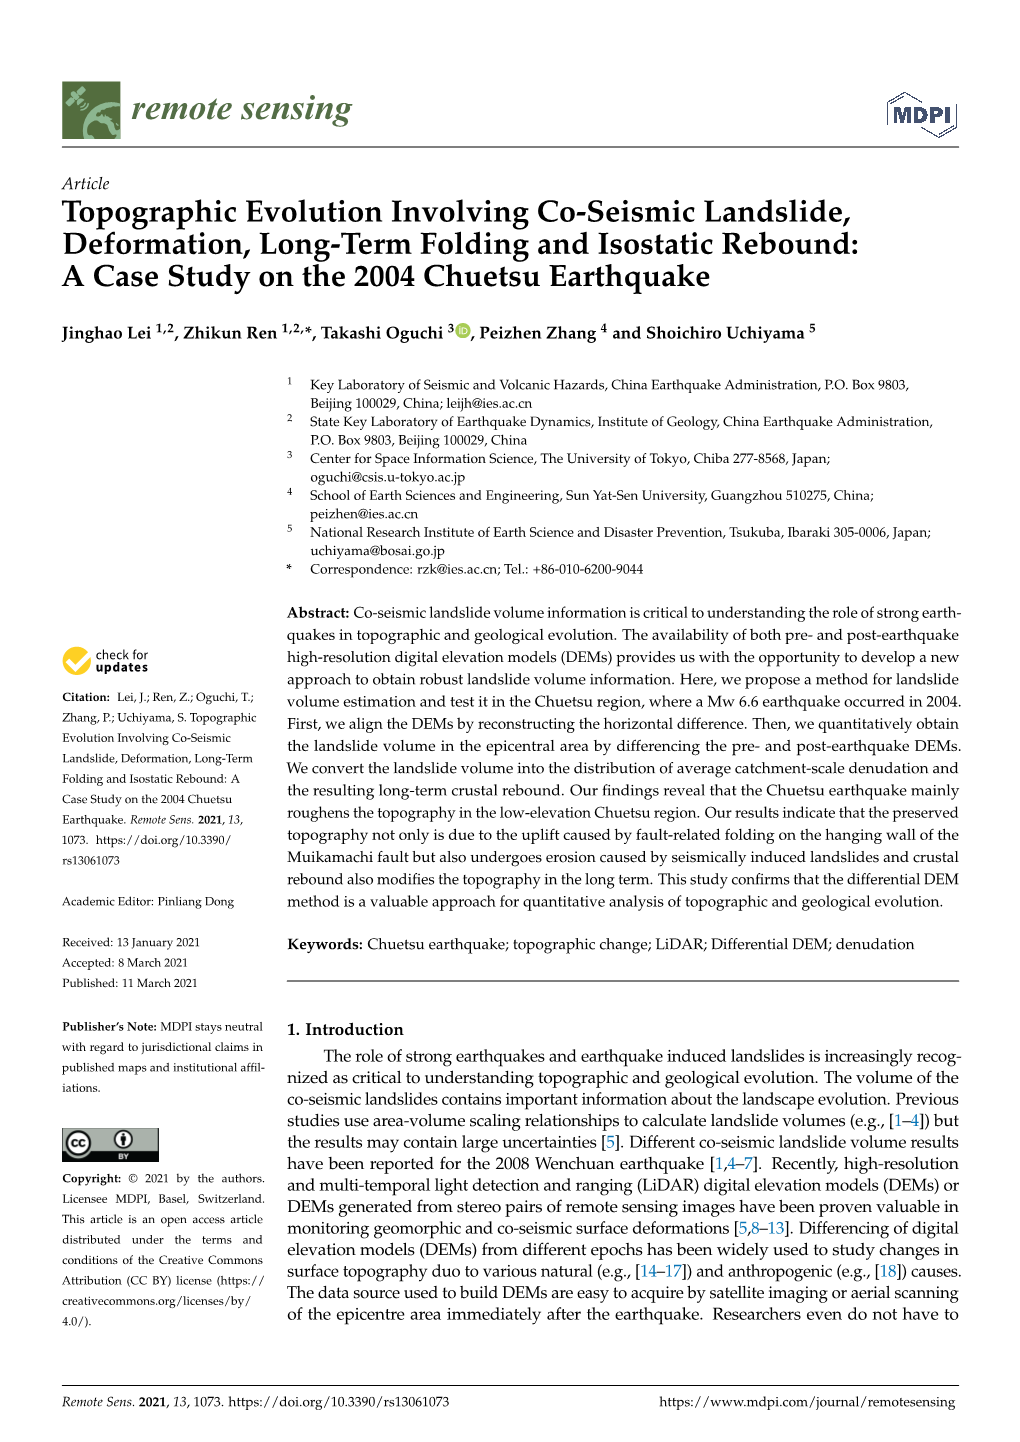 Topographic Evolution Involving Co-Seismic Landslide, Deformation, Long-Term Folding and Isostatic Rebound: a Case Study on the 2004 Chuetsu Earthquake